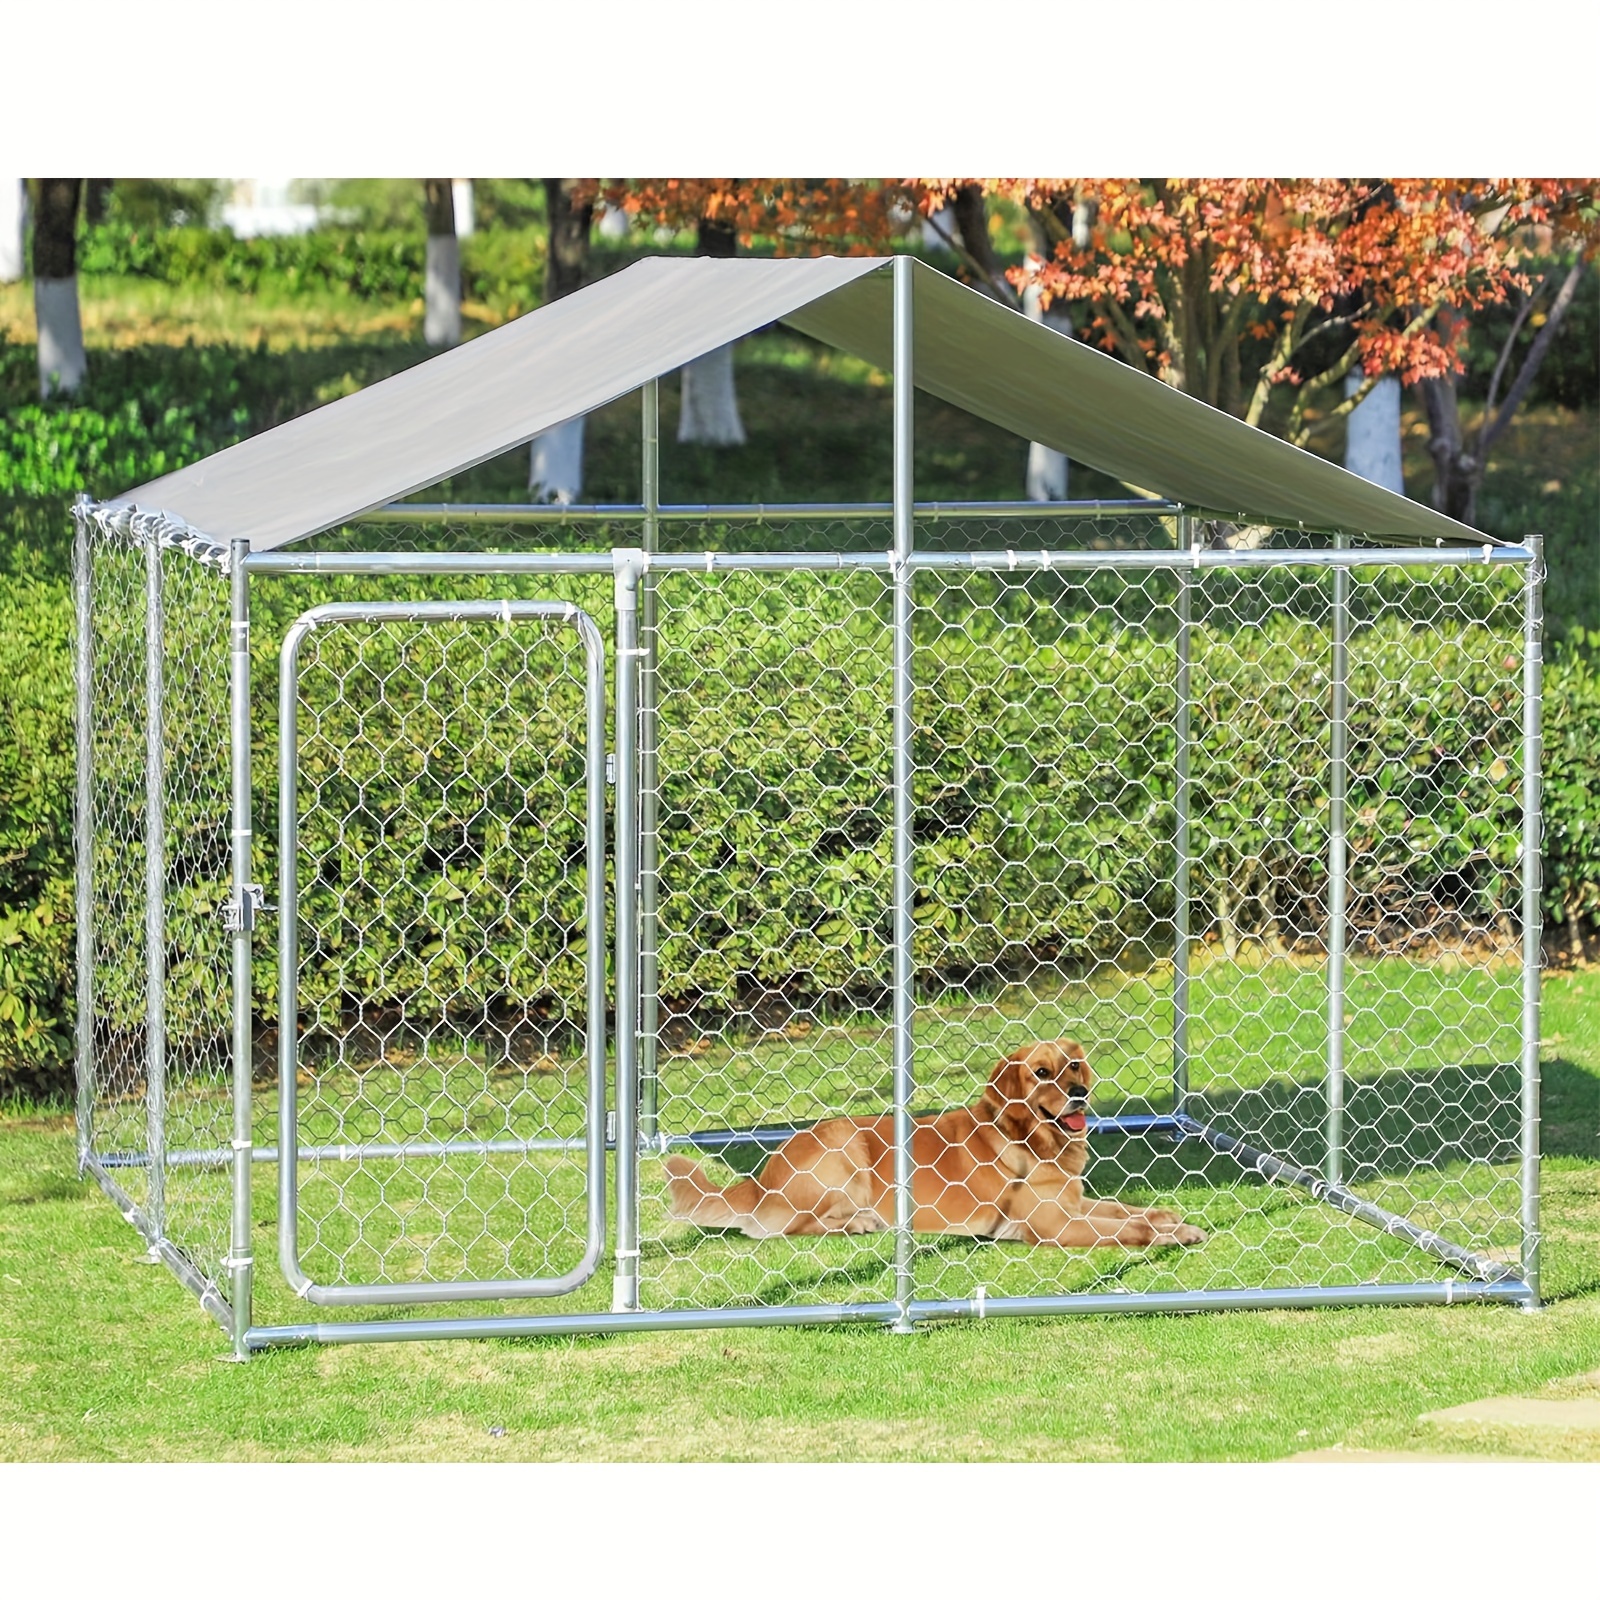 

Large Outside Dog Cage Kennels, Outdoor Dog Fence Pen For Backyard Dog Run With Water-resistant Cover (90"x 90" X 63", Silver)